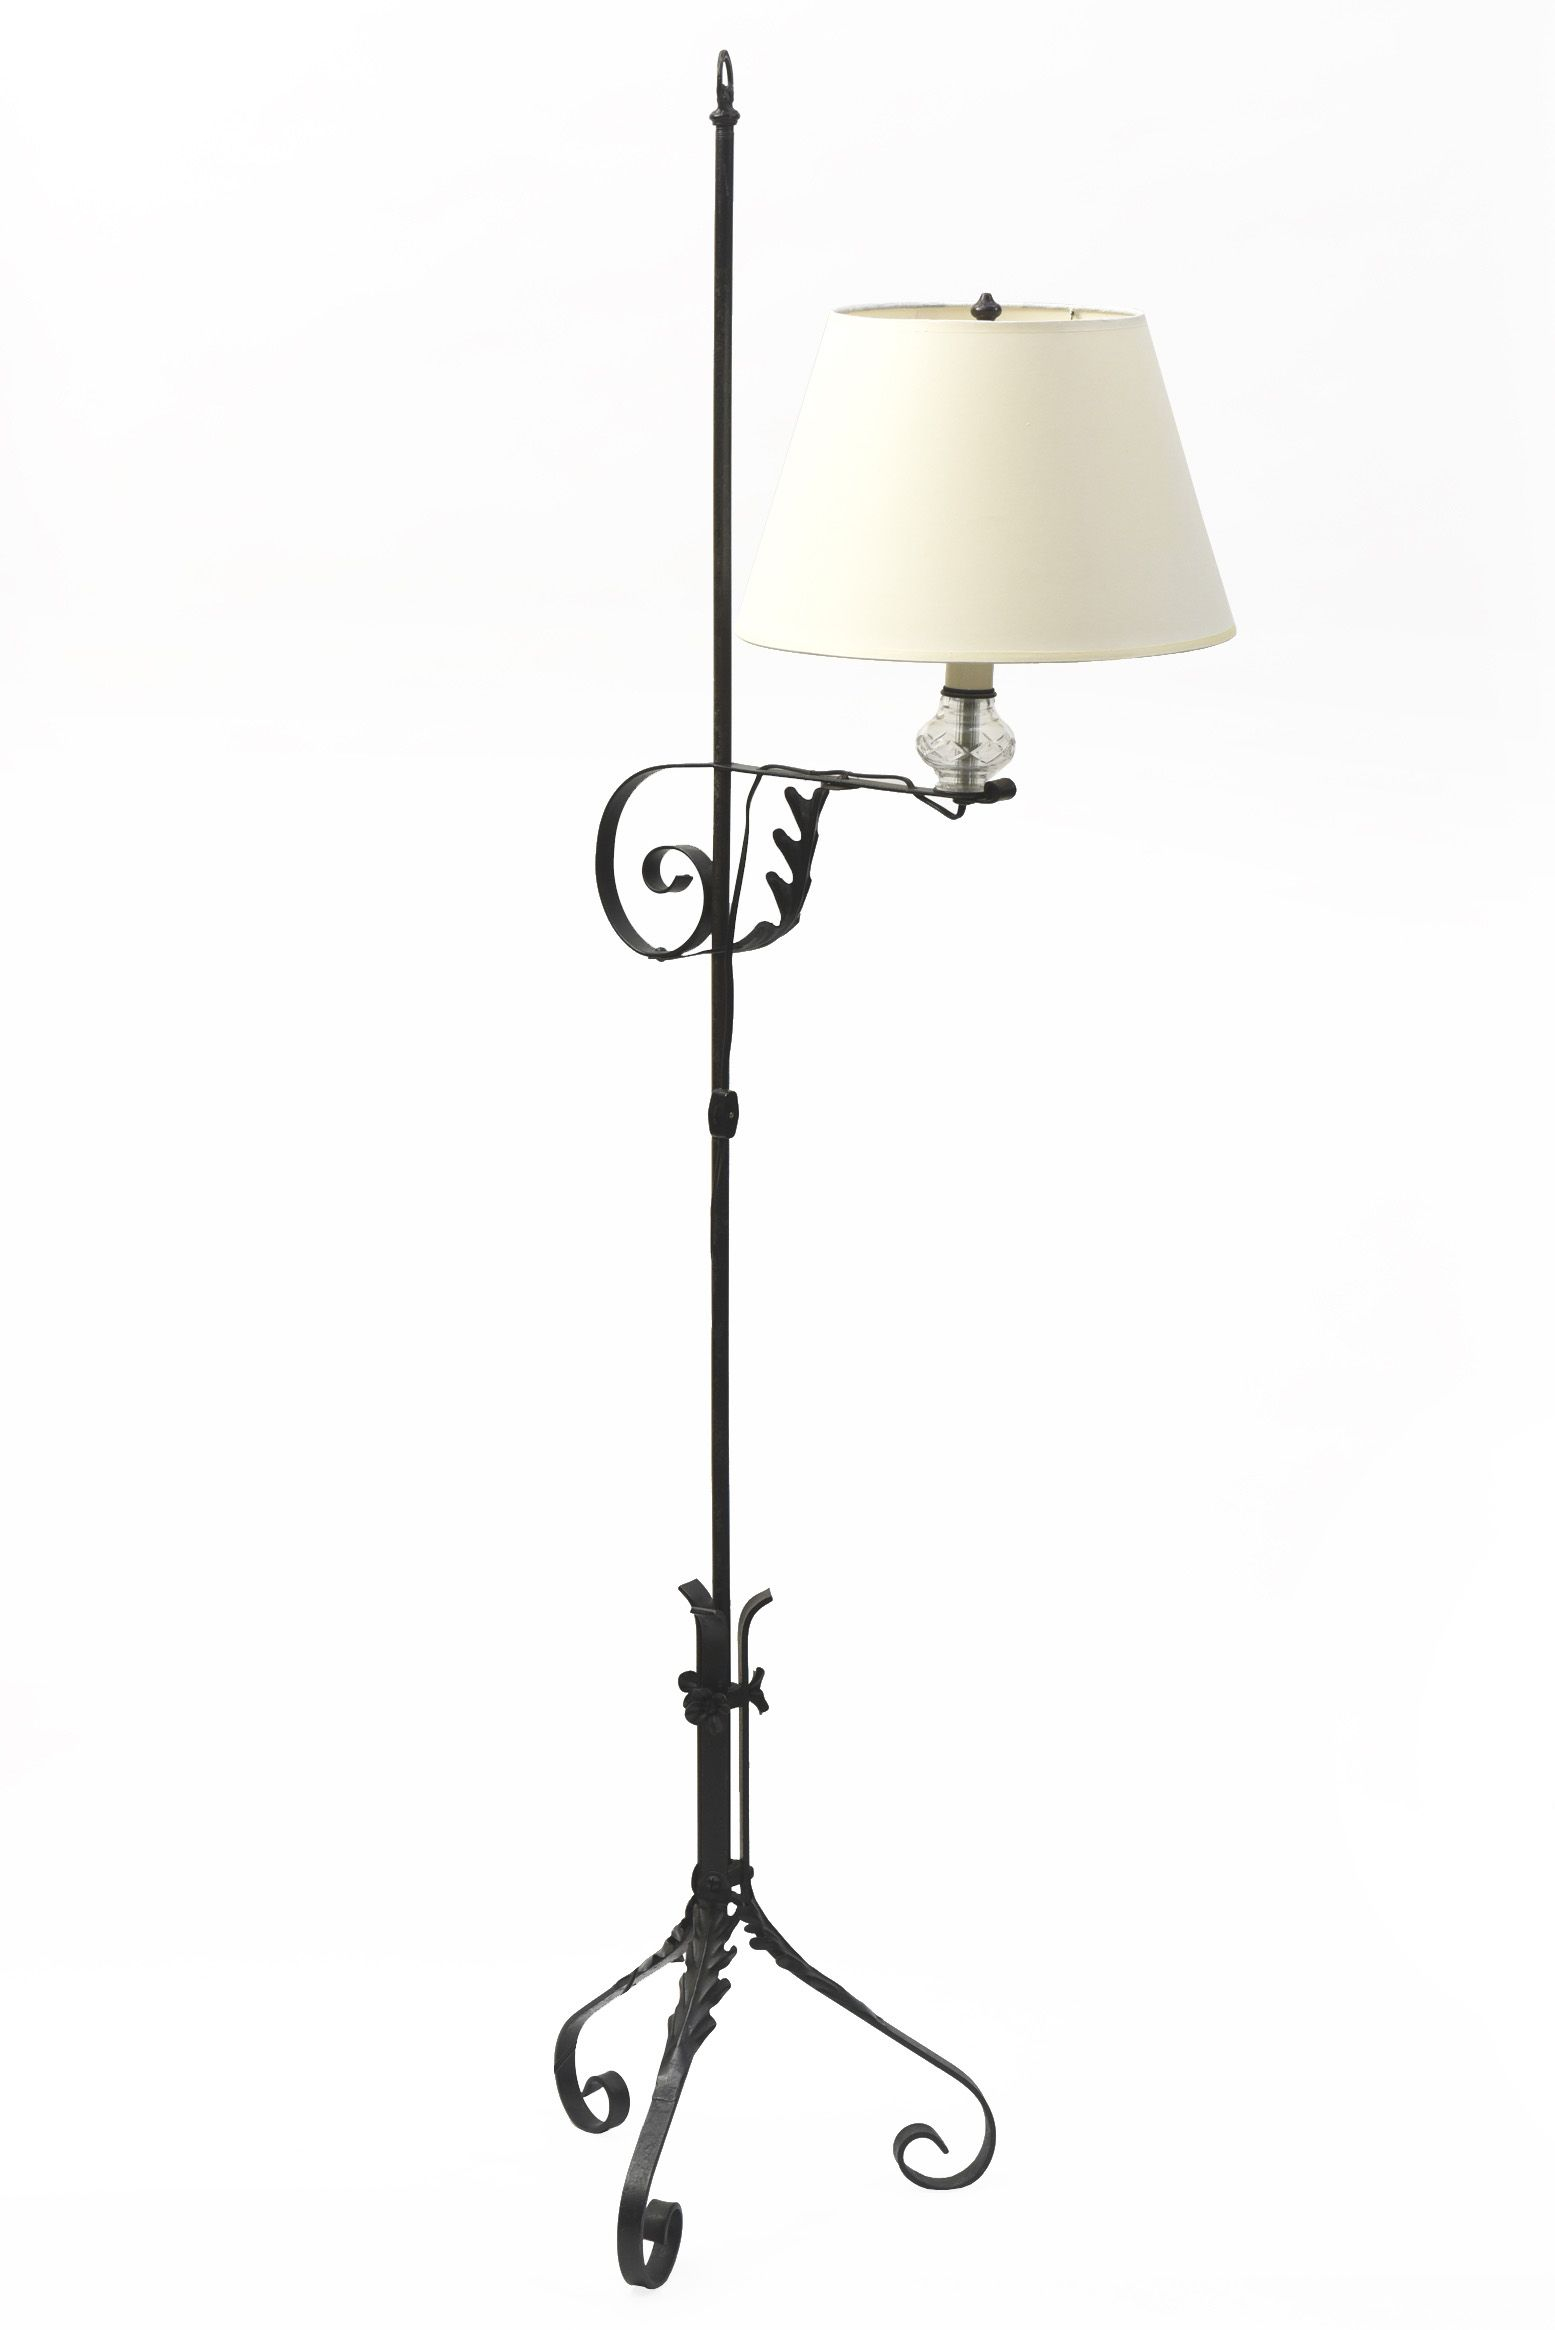 Wrought Iron Colonial Style Bridge Lamp Antique Lighting throughout dimensions 1555 X 2330